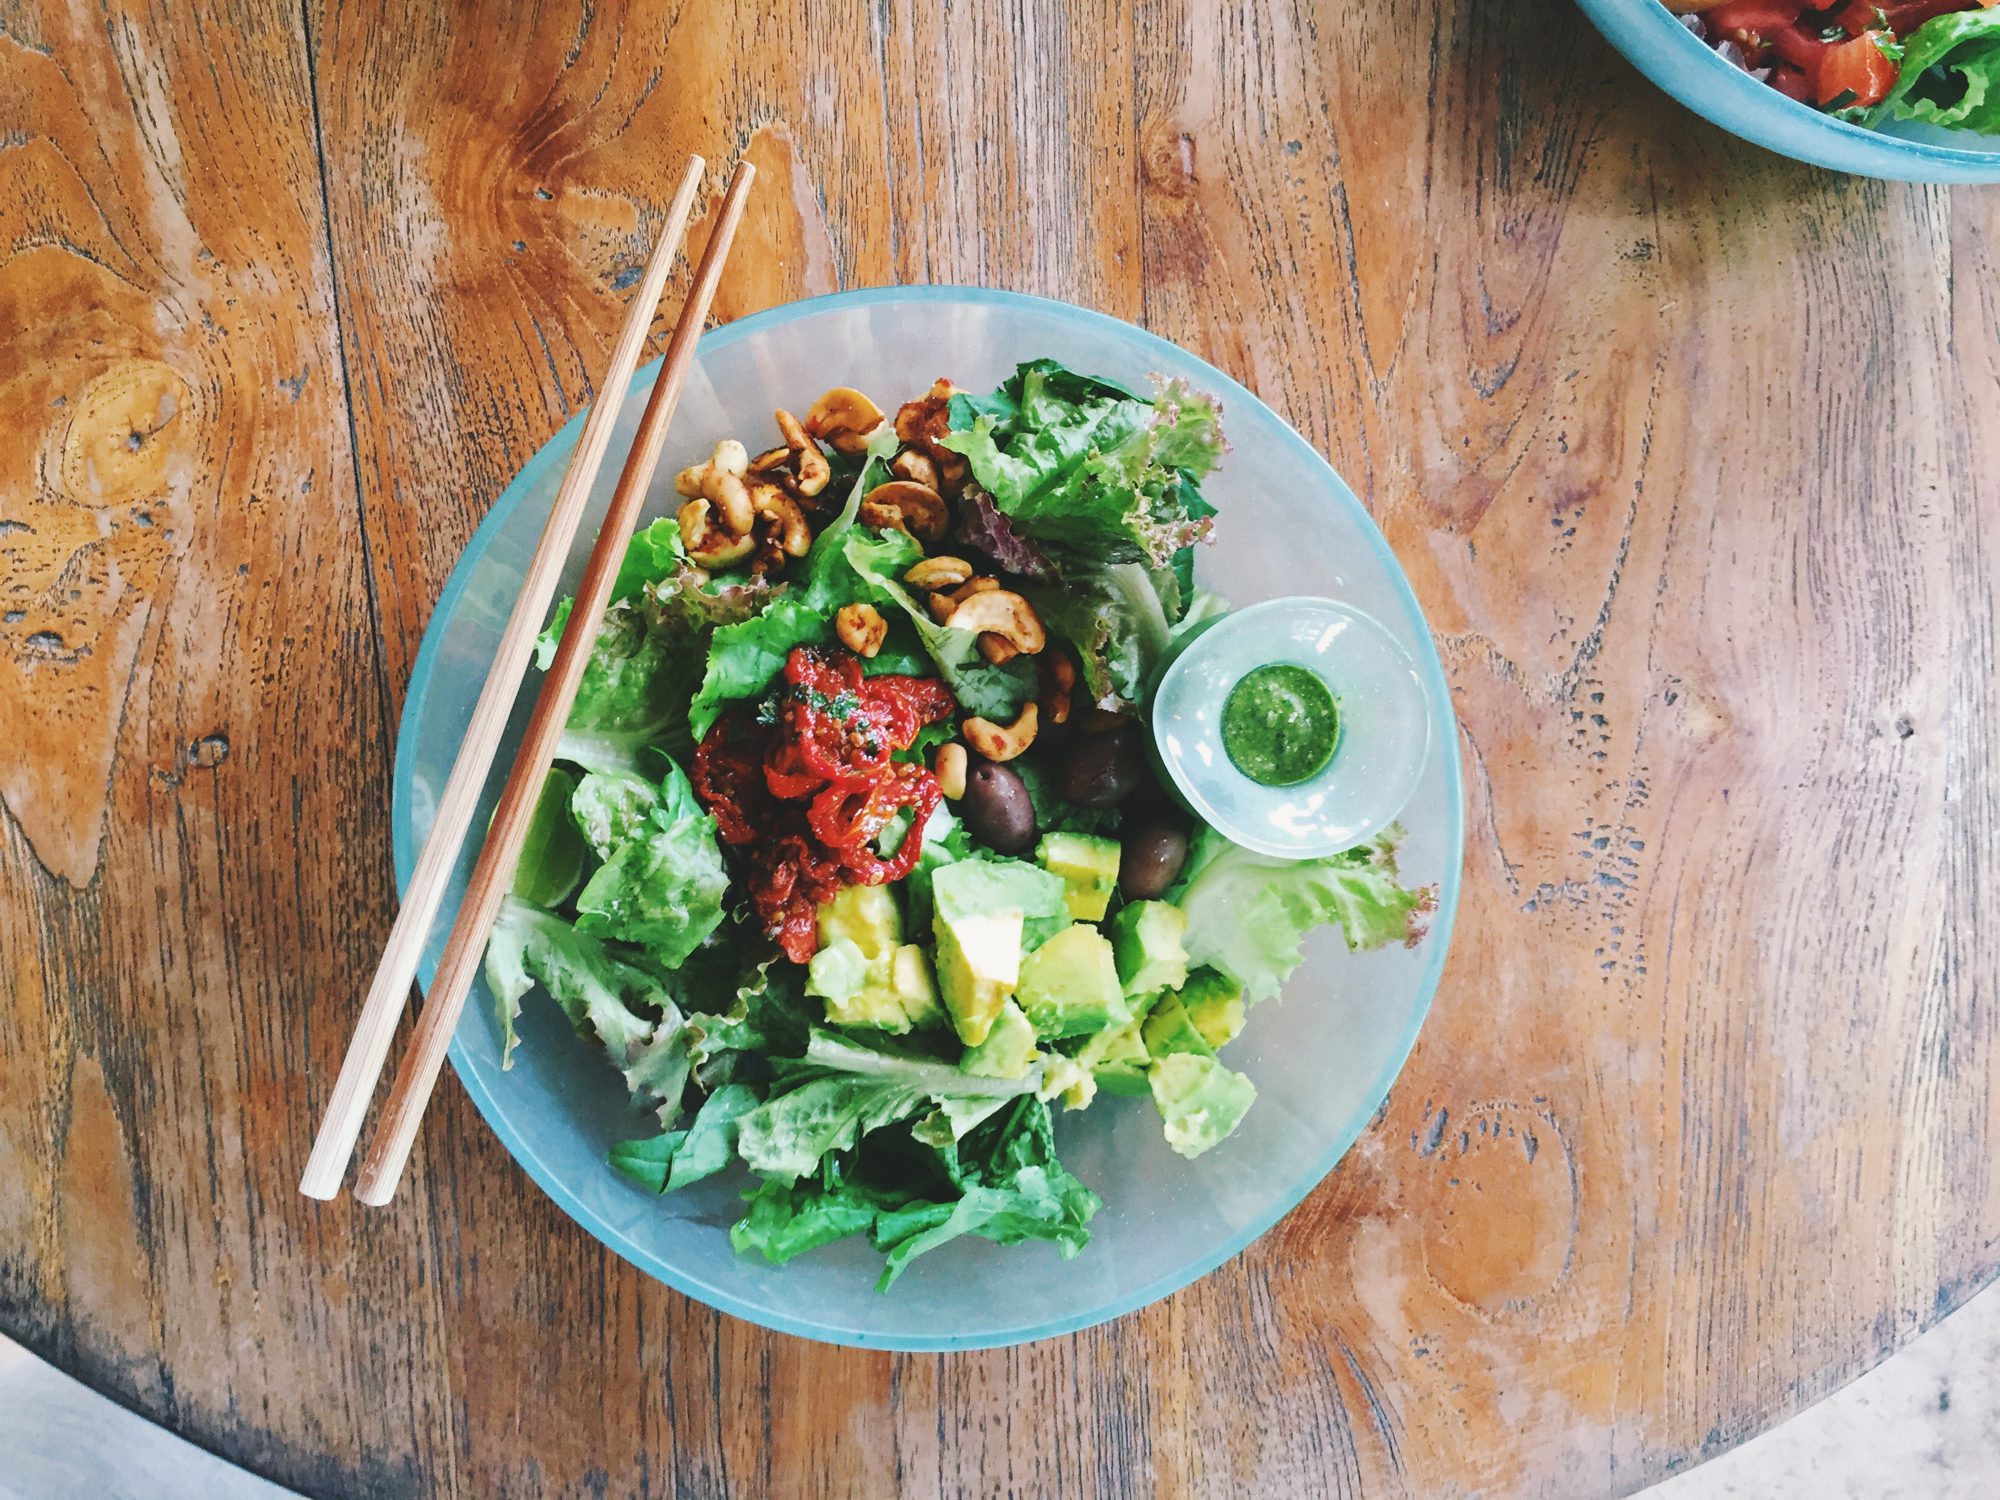 About Bali, organic and the best quinoa salad